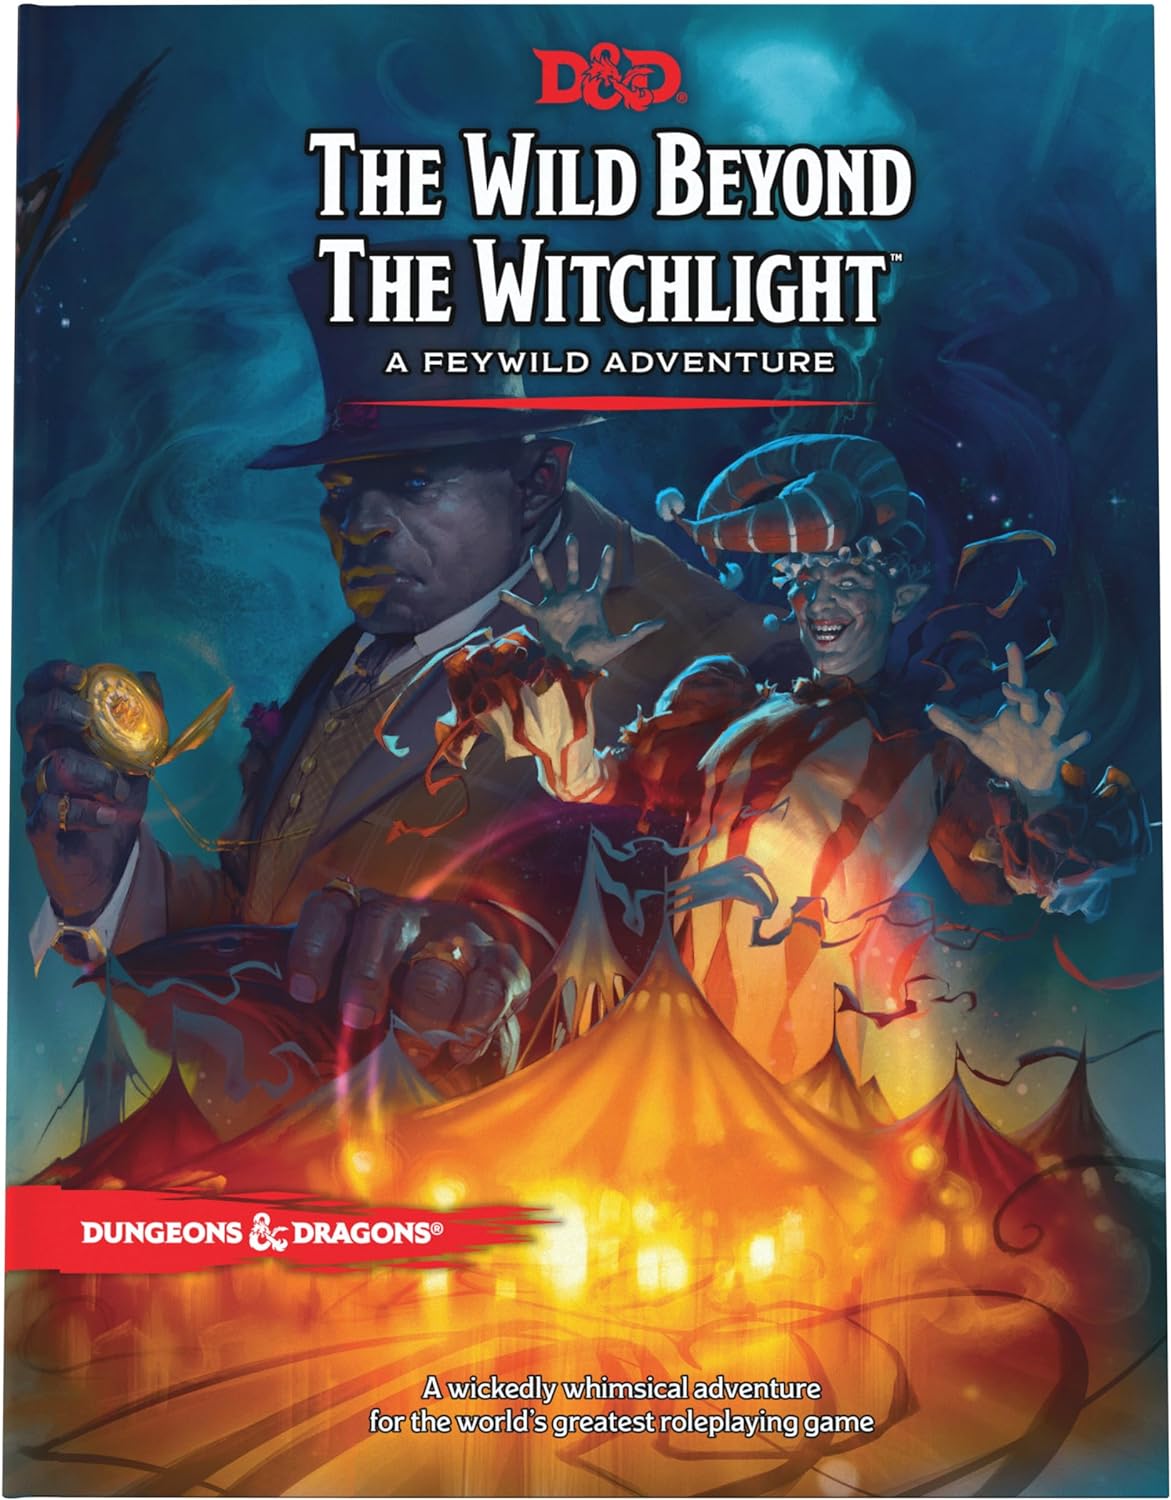 The Wild Beyond The Witchlight: A Feywild Adventure (Dungeons & Dragons)